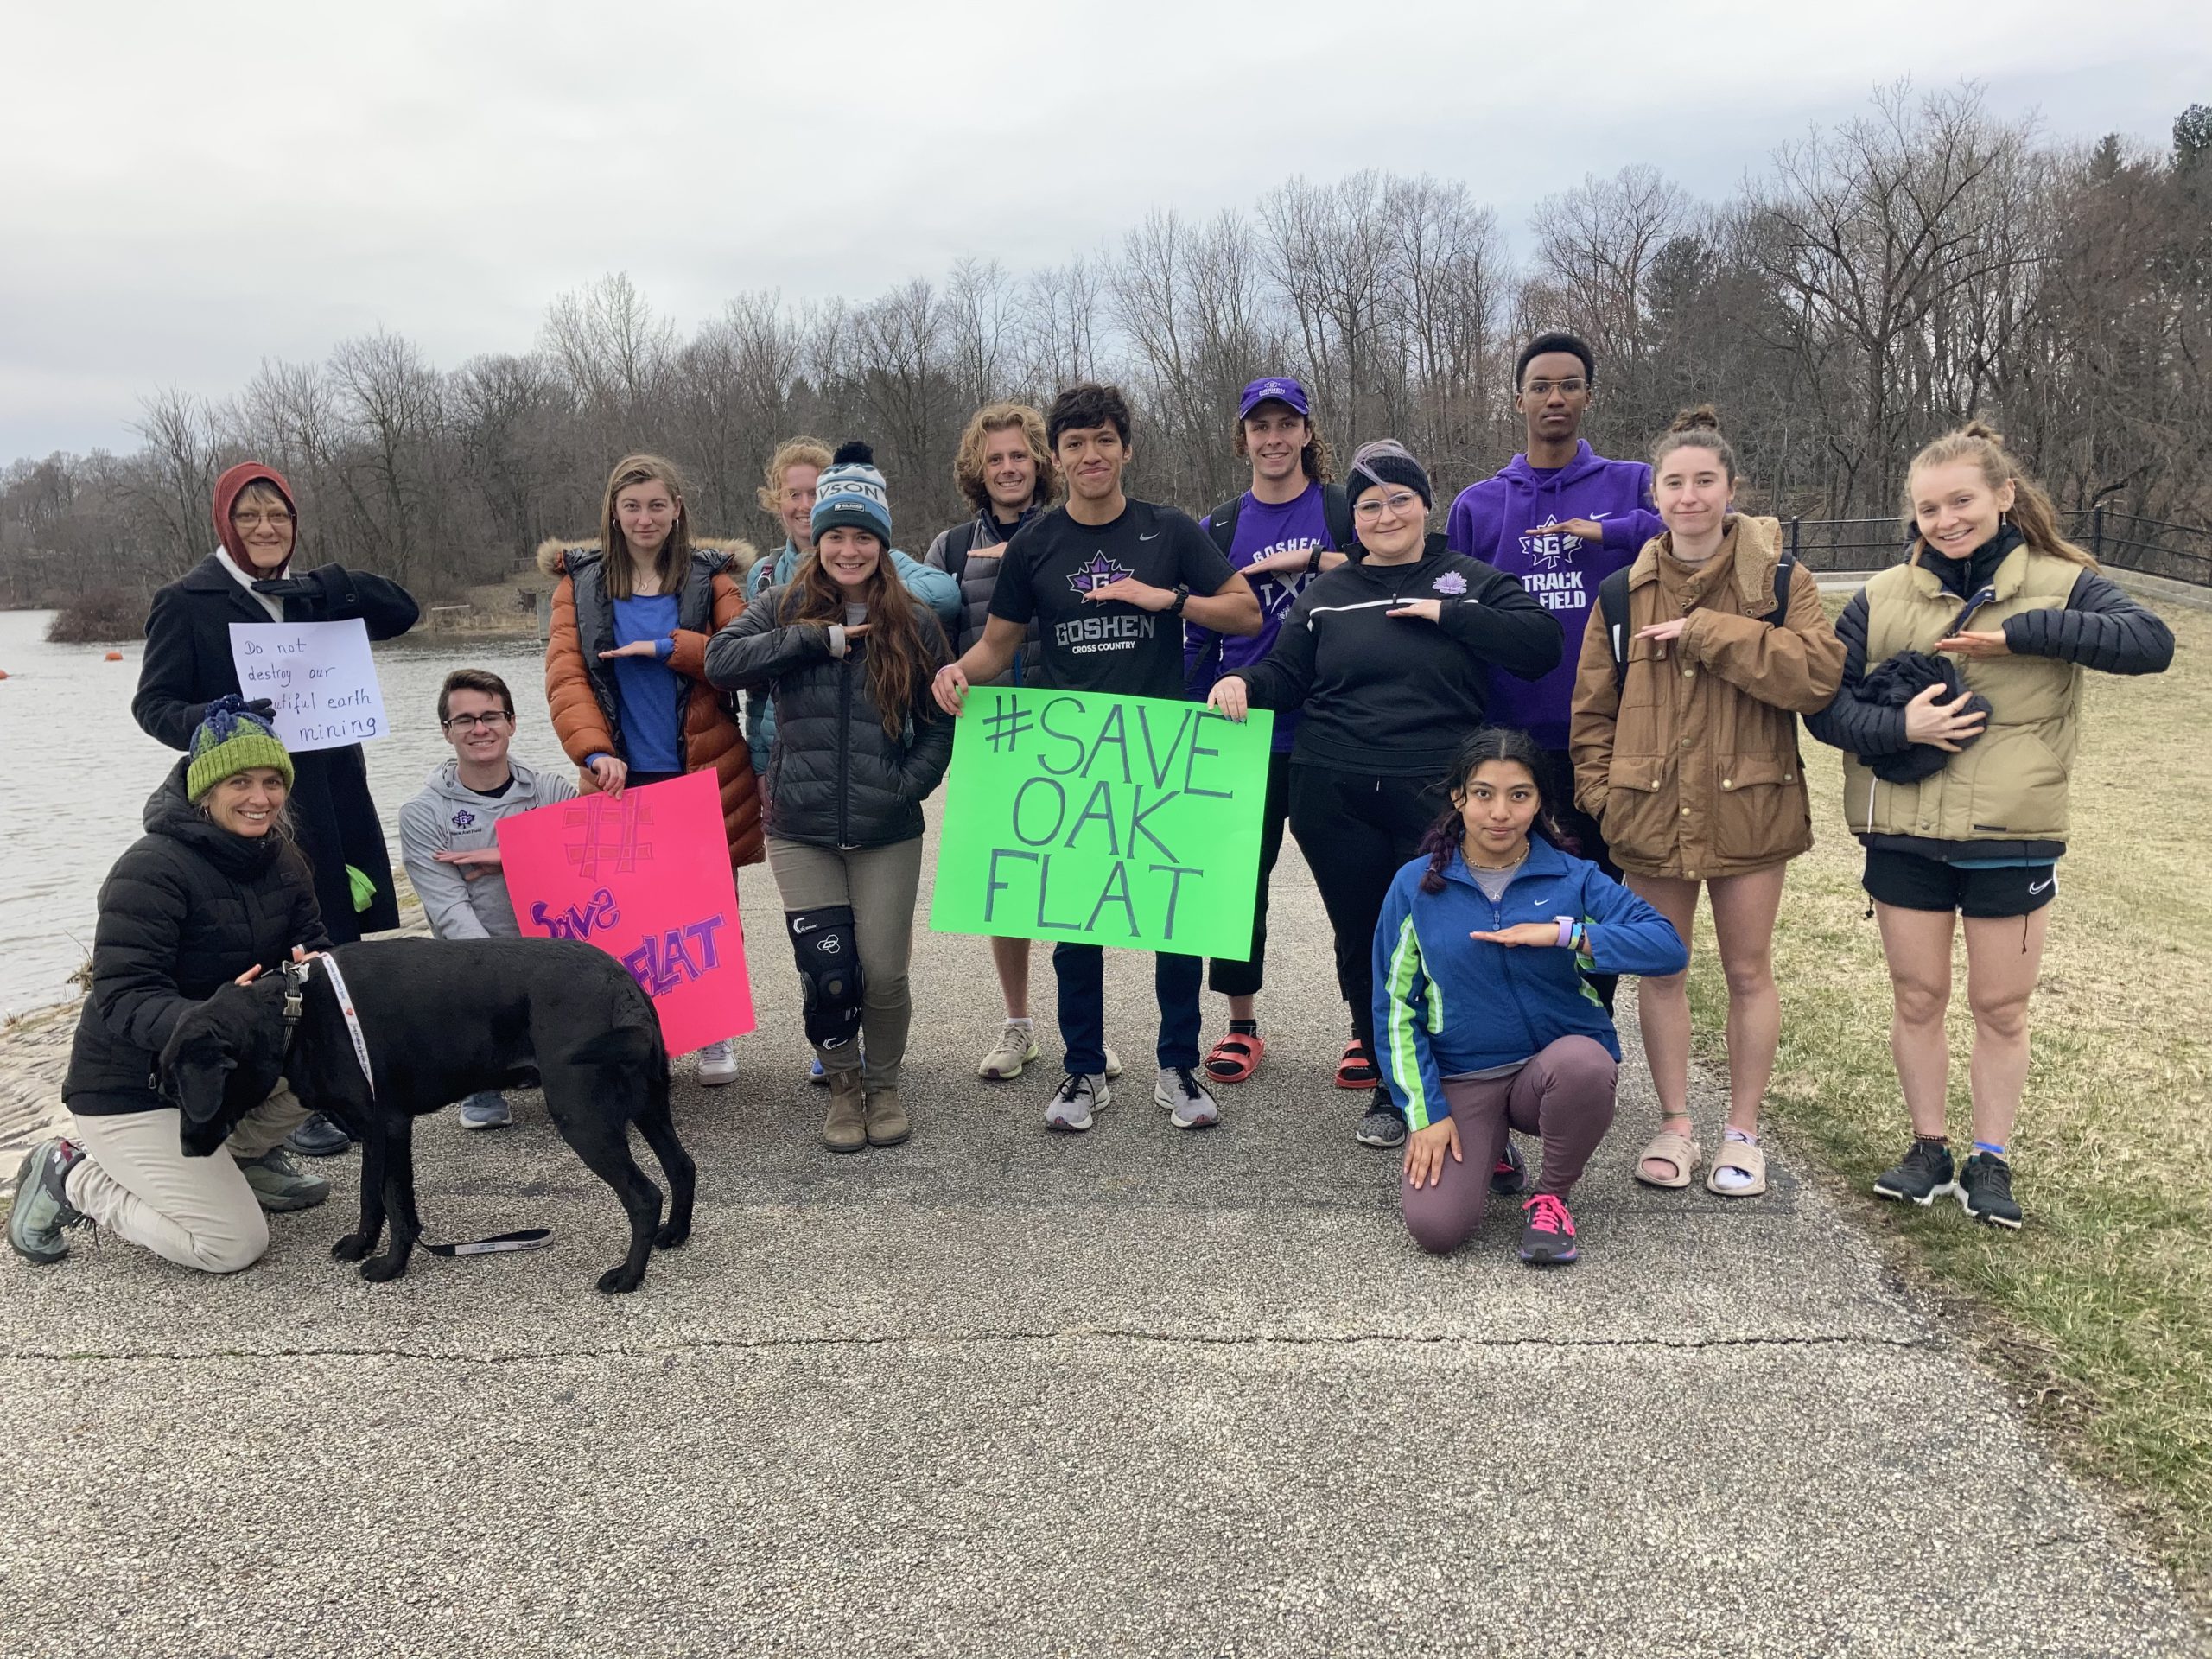 Students and community members in Goshen, Indiana walked to the Elkhart River on Tuesday where Manny Villanueva, (center with the green sign), led the group in prayer for Oak Flat and the Apache stronghold. Photo contributed by Arleth Martinez.